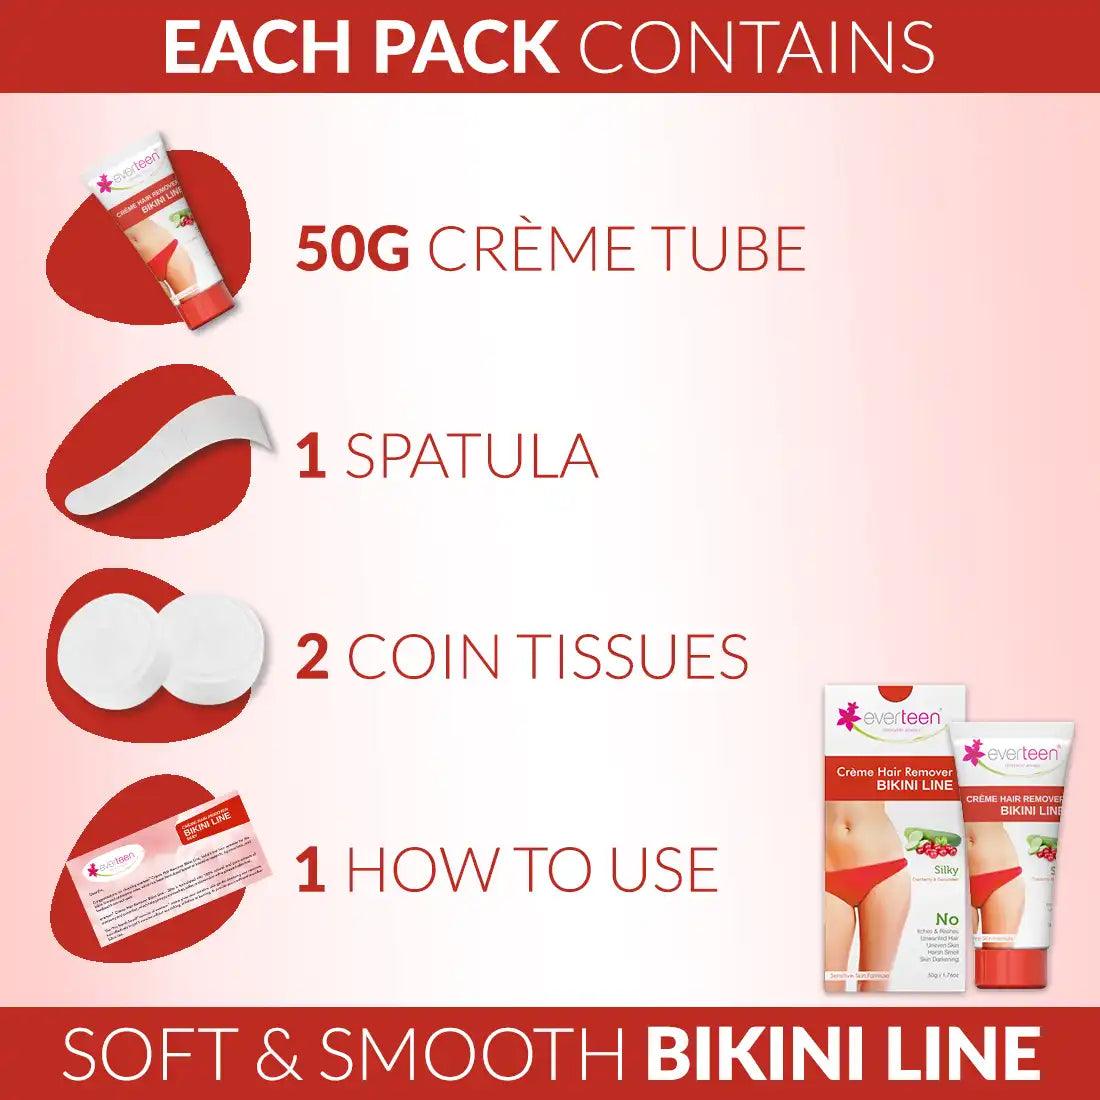 Every Pack of everteen Silky Bikini Line Hair Remover Cream Contains One Spatula and Two Coin Tissues - everteen-neud.com